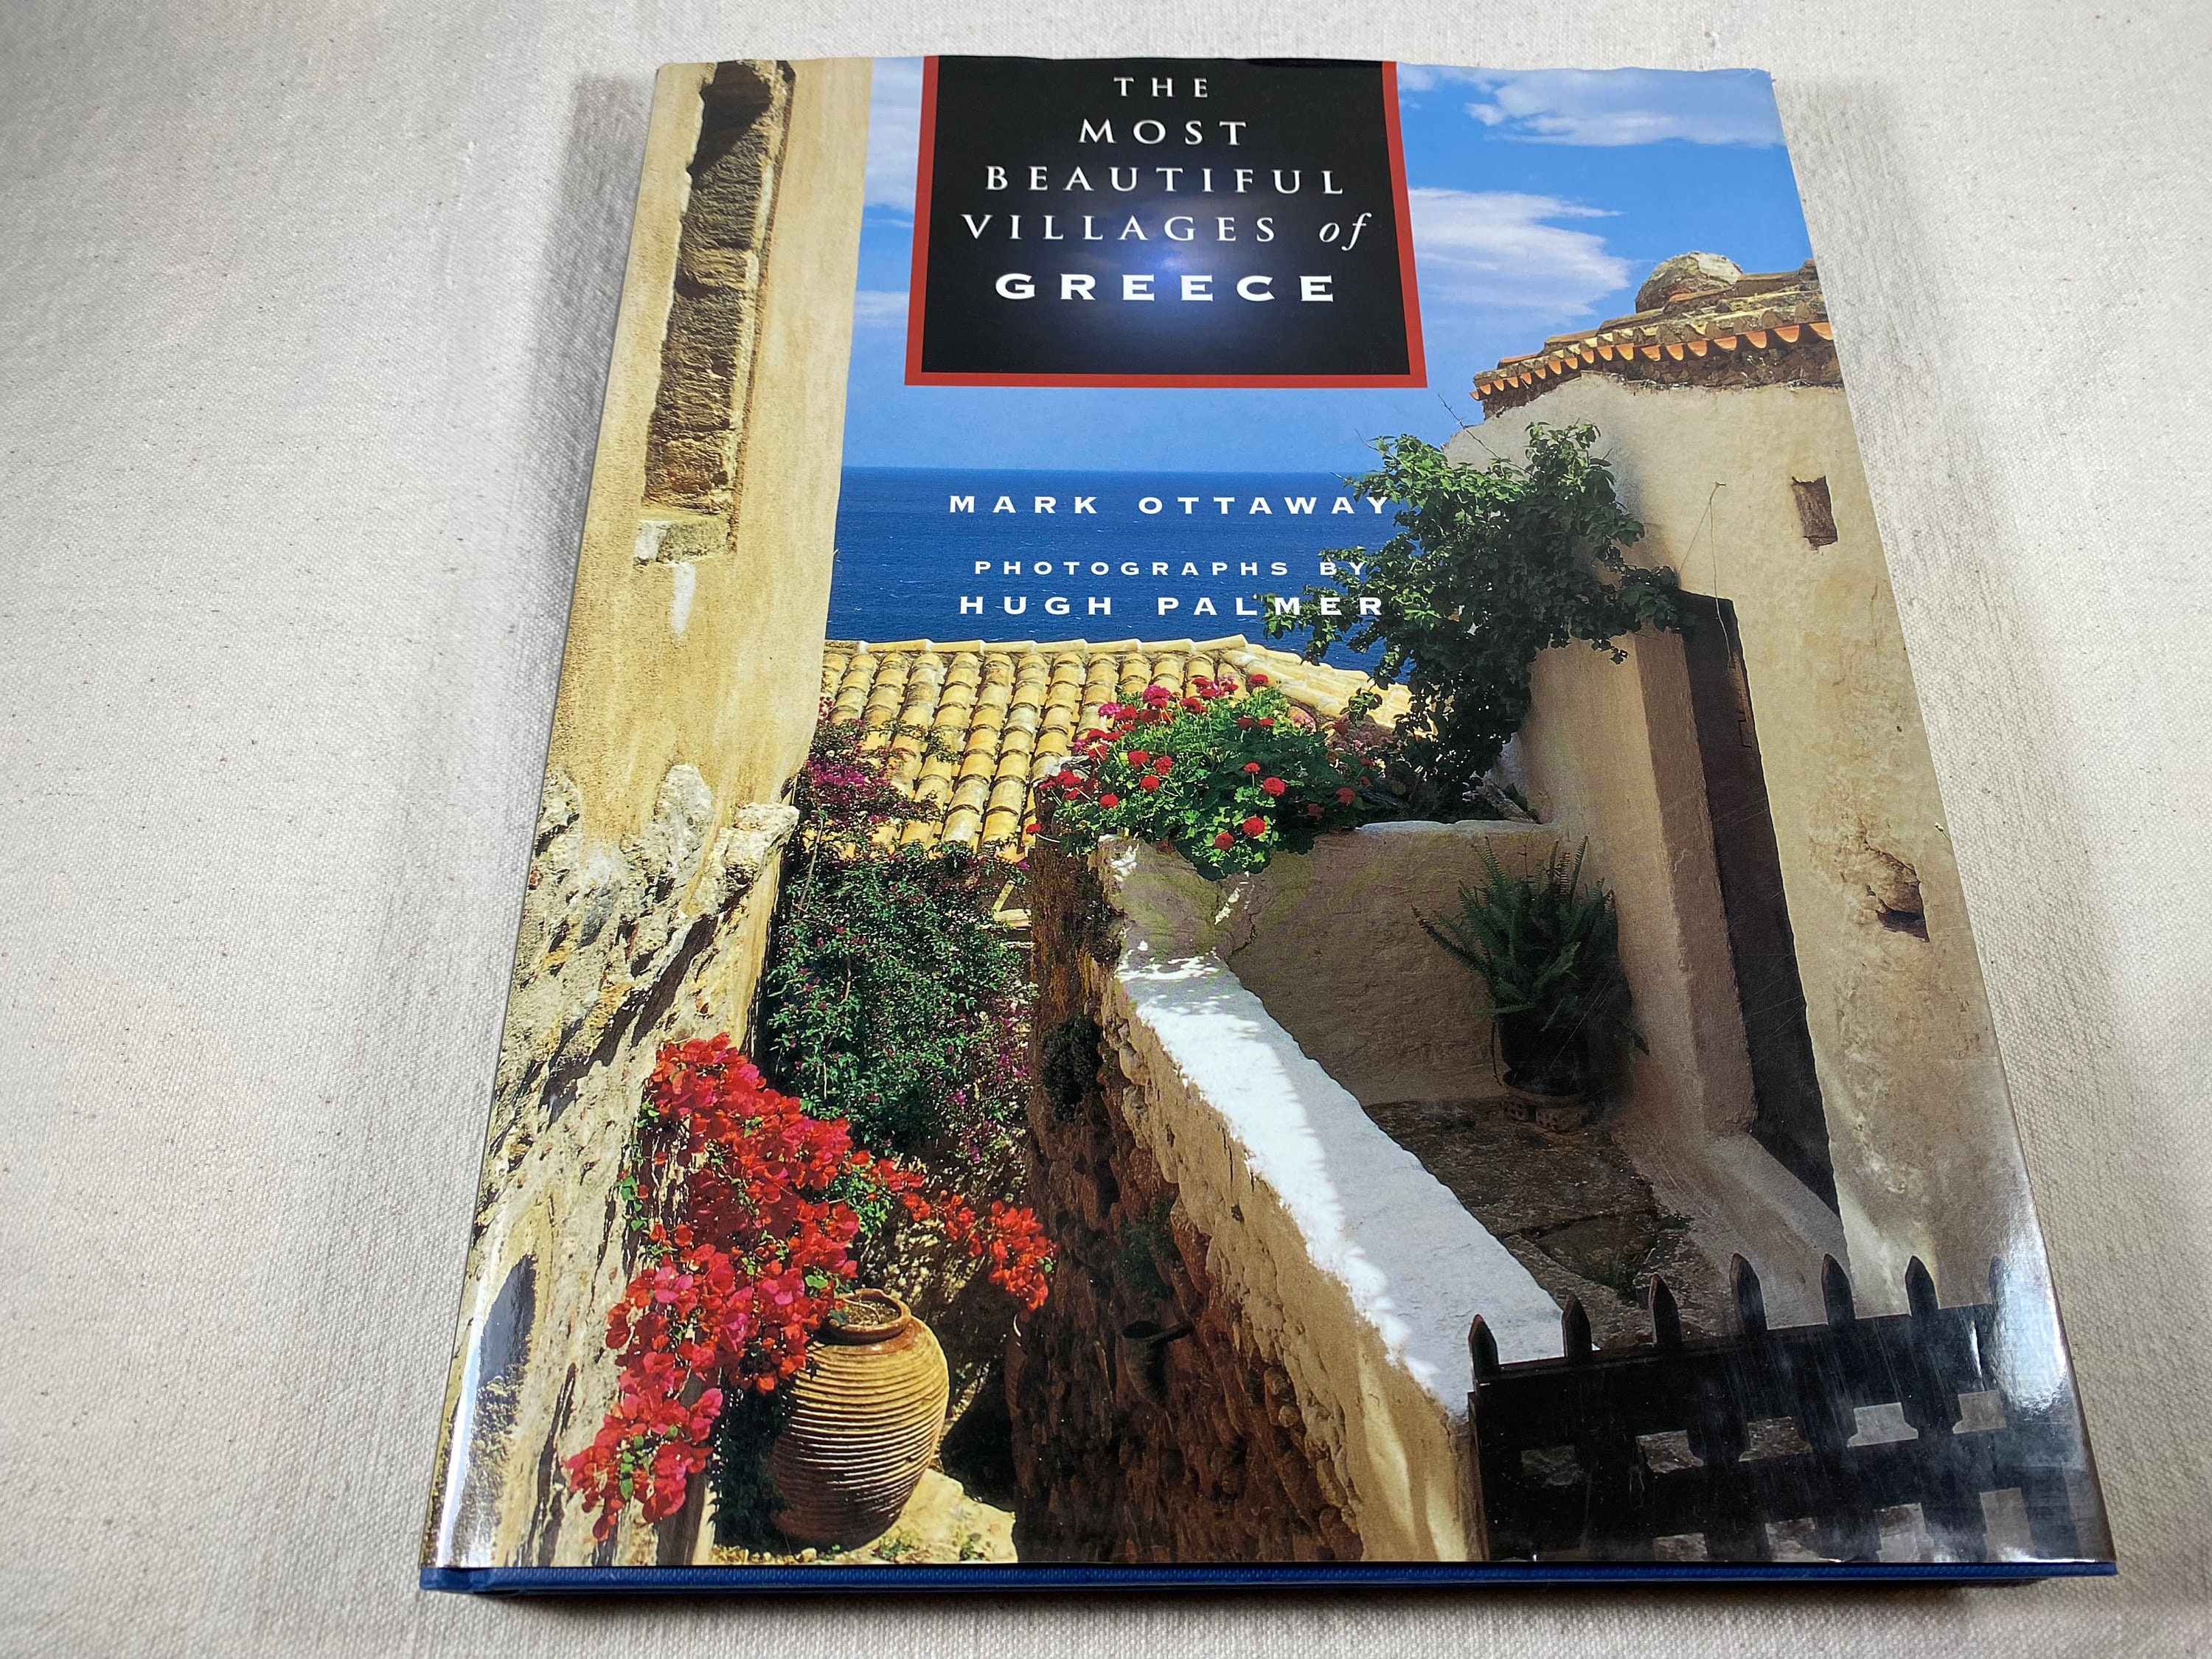 The Most Beautiful Villages of Greece by Mark Ottaway Photos Hugh Palmer  Vintage Mediterranean Photography Coffee Table Book -  India